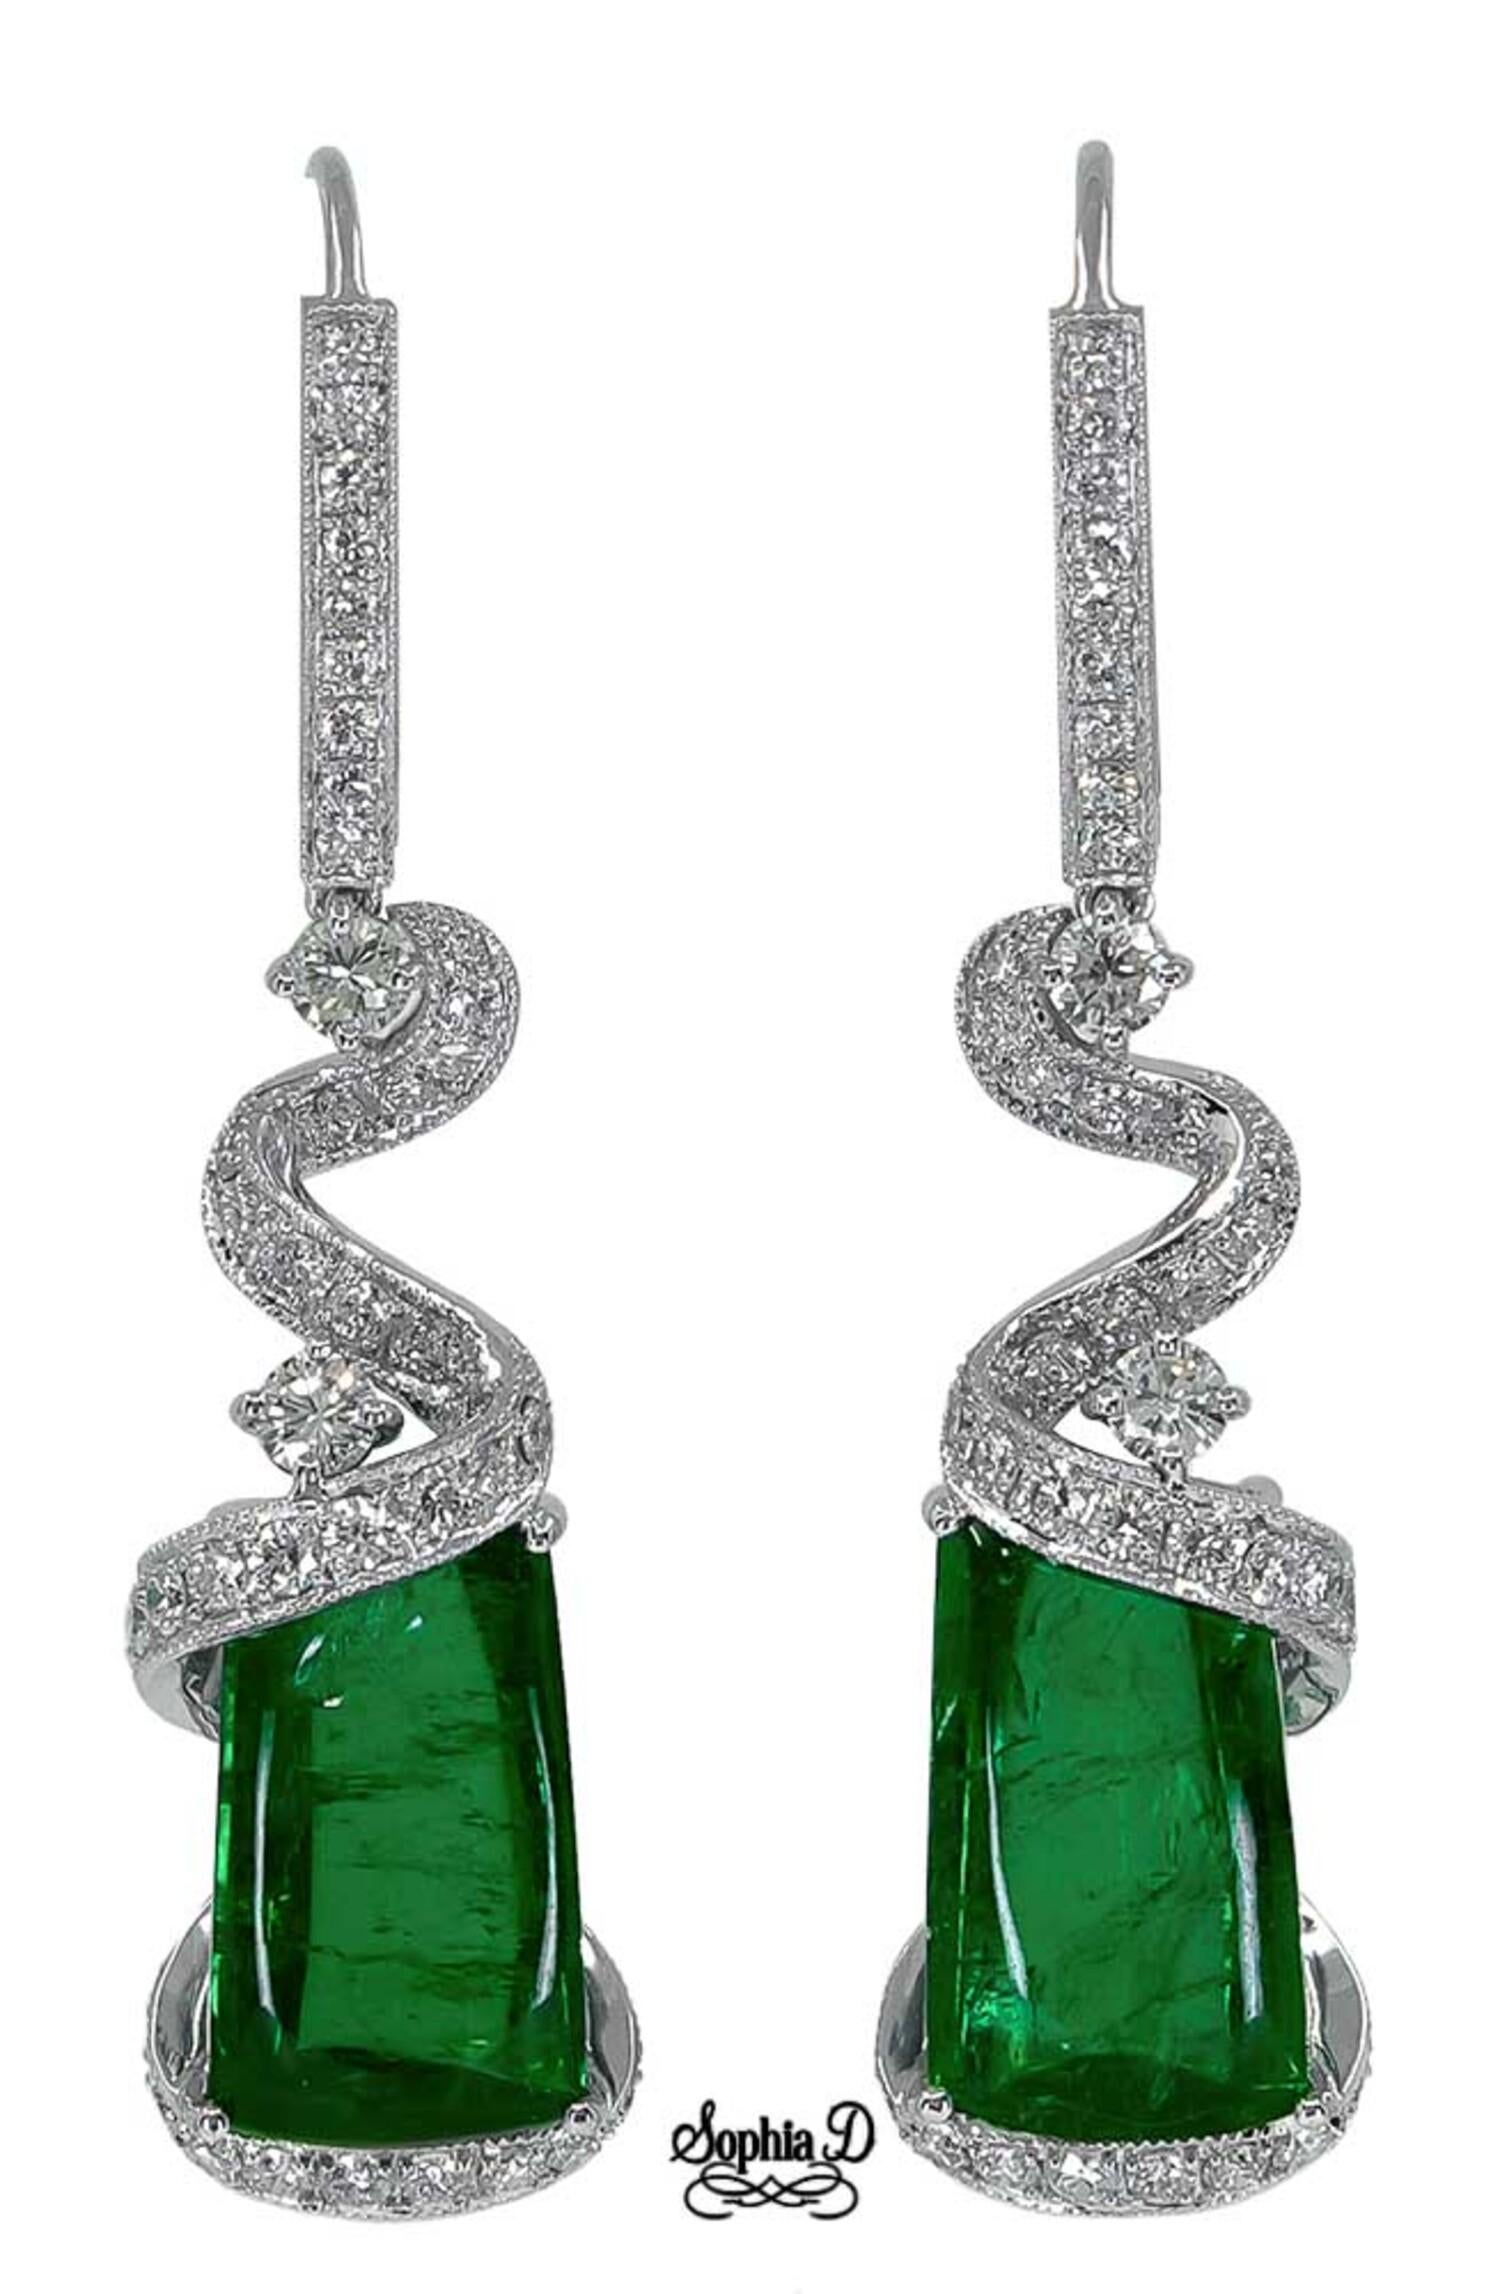 One of a Kind earring with 11.91 carat emeralds, and 1.35 carat diamonds

Sophia D by Joseph Dardashti LTD has been known worldwide for 35 years and are inspired by classic Art Deco design that merges with modern manufacturing techniques.
